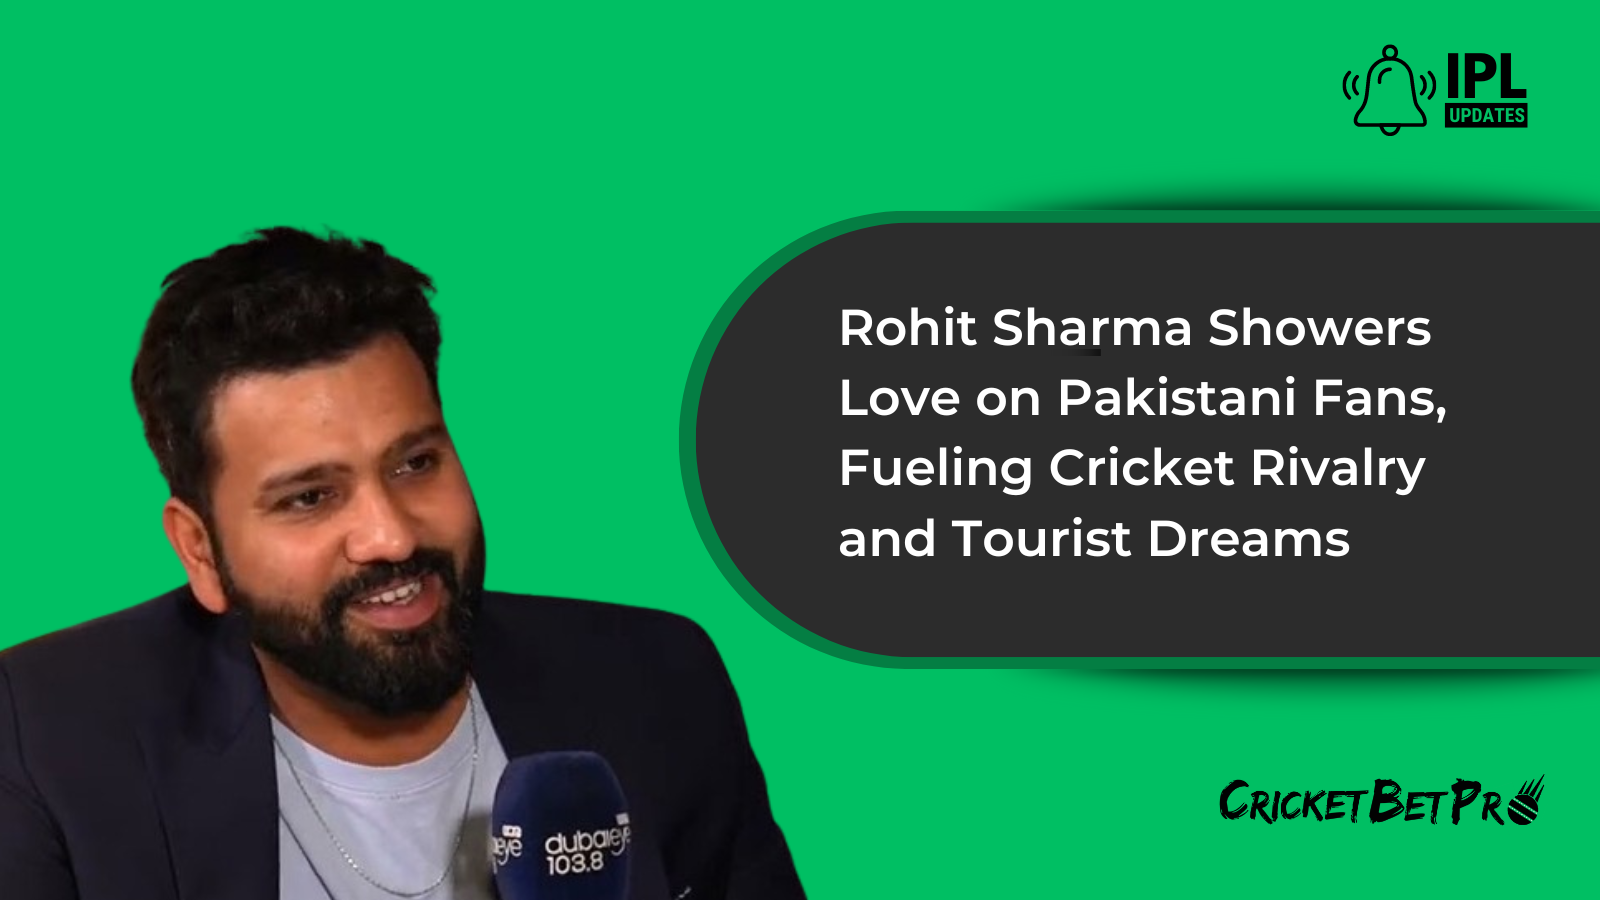 Rohit-Sharma-Showers-Love-on-Pakistani-Fans-Fueling-Cricket-Rivalry-and-Tourist-Dreams.png